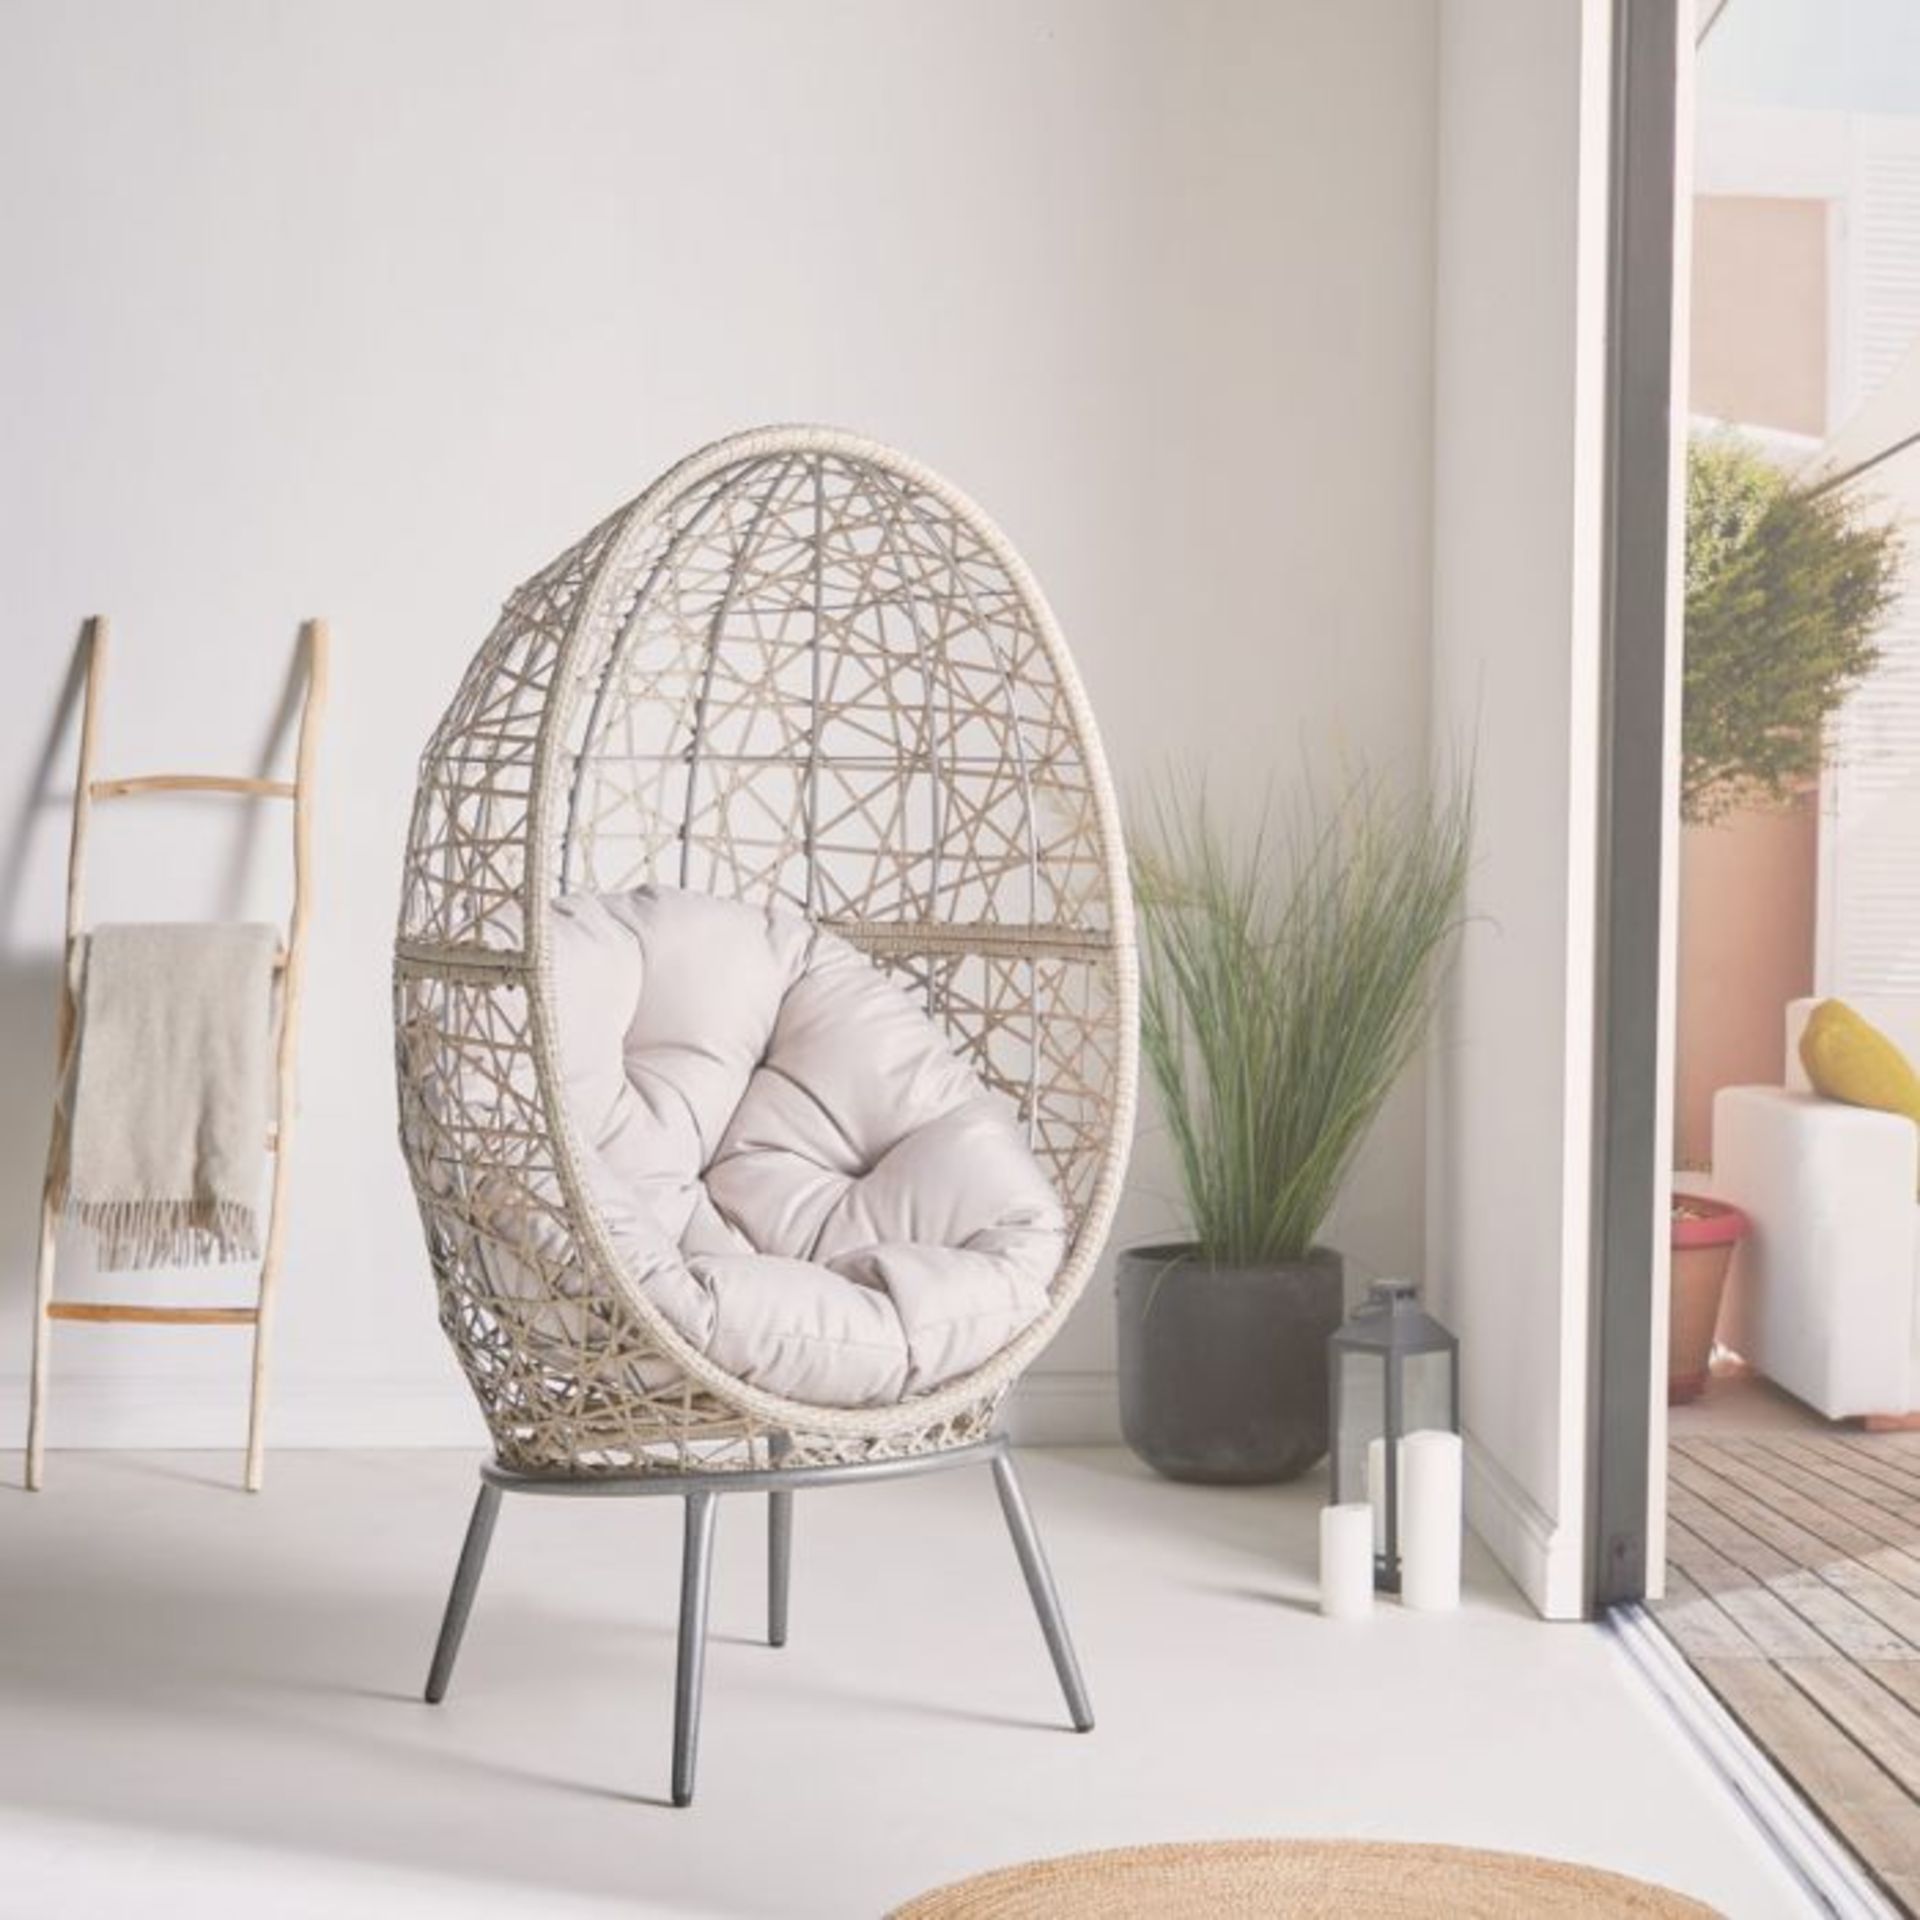 Freestanding Natural Rattan Egg Chair. RRP £549.99. Get cosy on this rattan cocoon chair. (